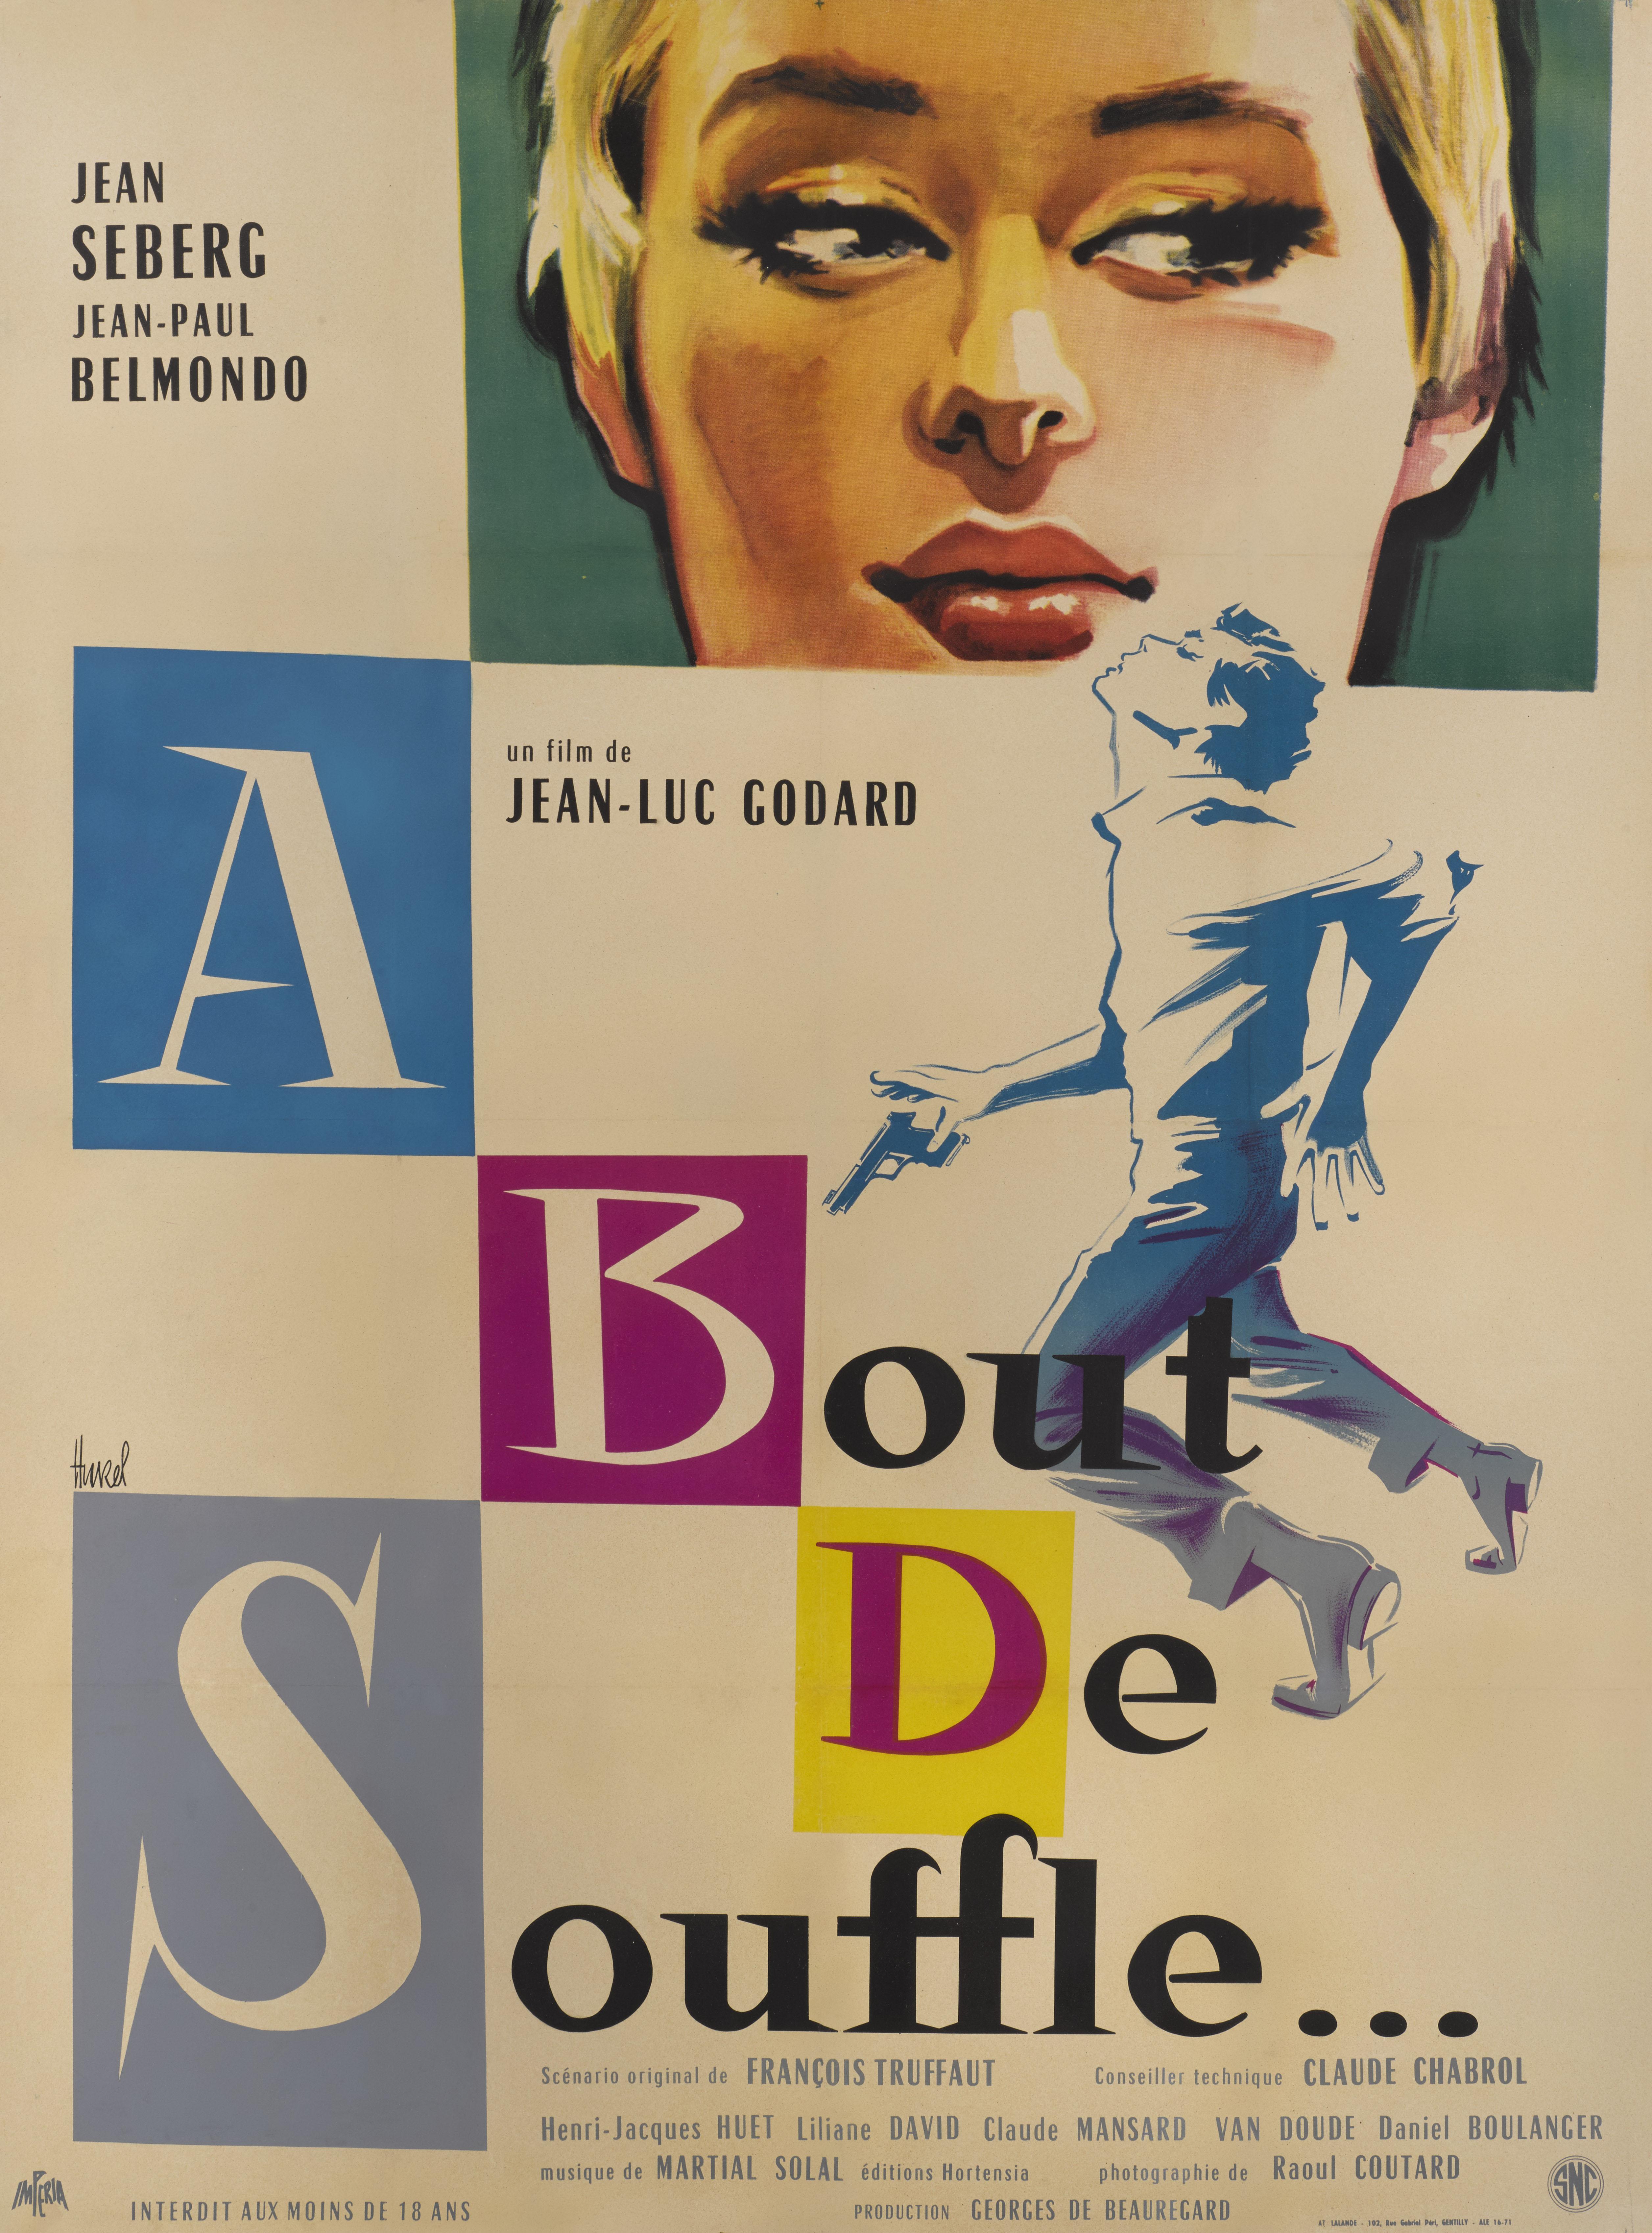 Original French film poster from the classic 1960 French New Wave film. 
This style B poster is the rarest on this title, and seldom surfaces.
This is a 1960 French New Wave film written and directed by Jean-Luc Godard, starring Jean-Paul Belmondo